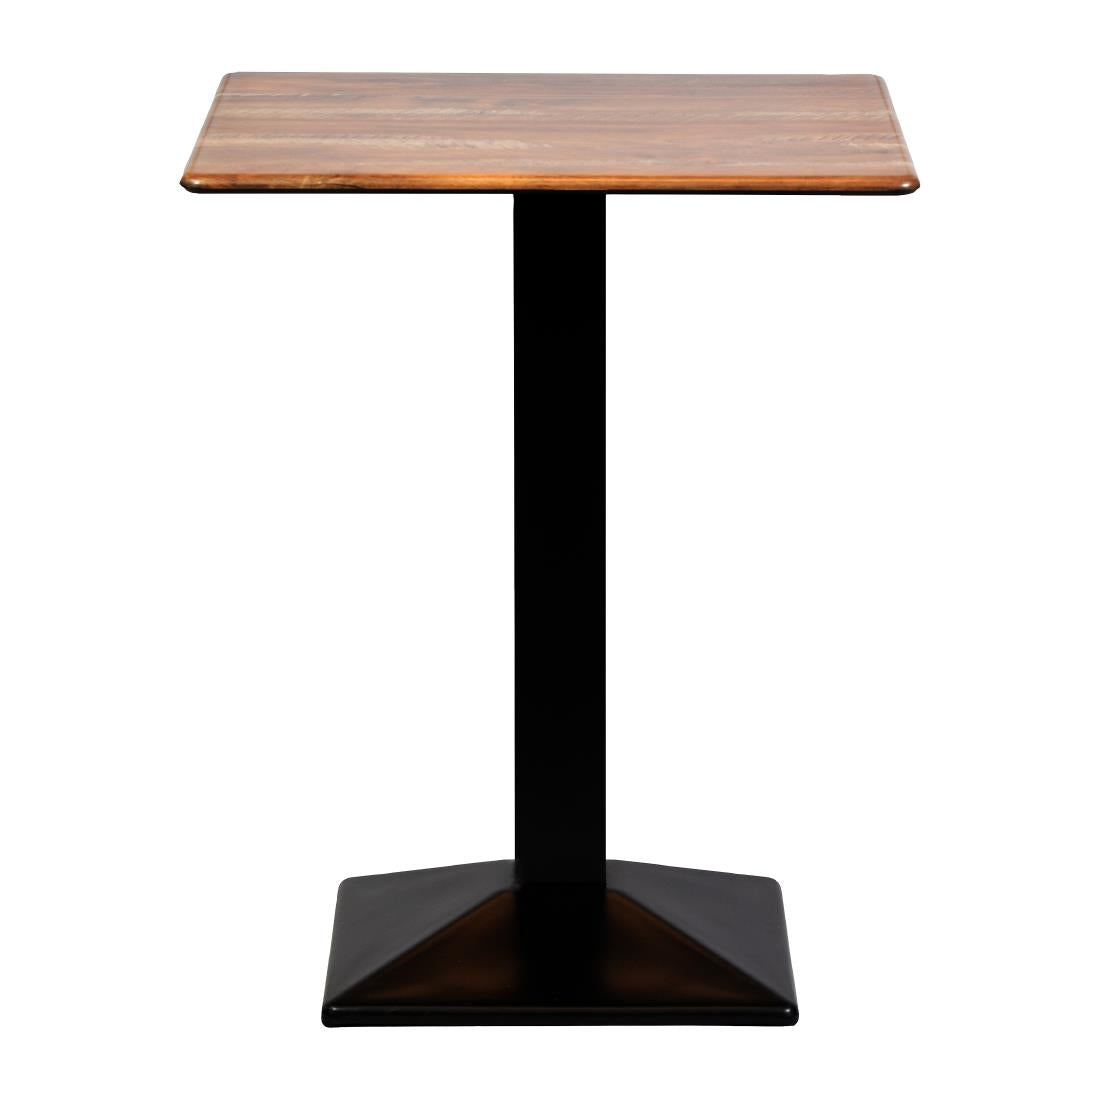 CZ828 Turin Metal Base Square Poseur Table with Laminate Top Planked Oak 600mm JD Catering Equipment Solutions Ltd